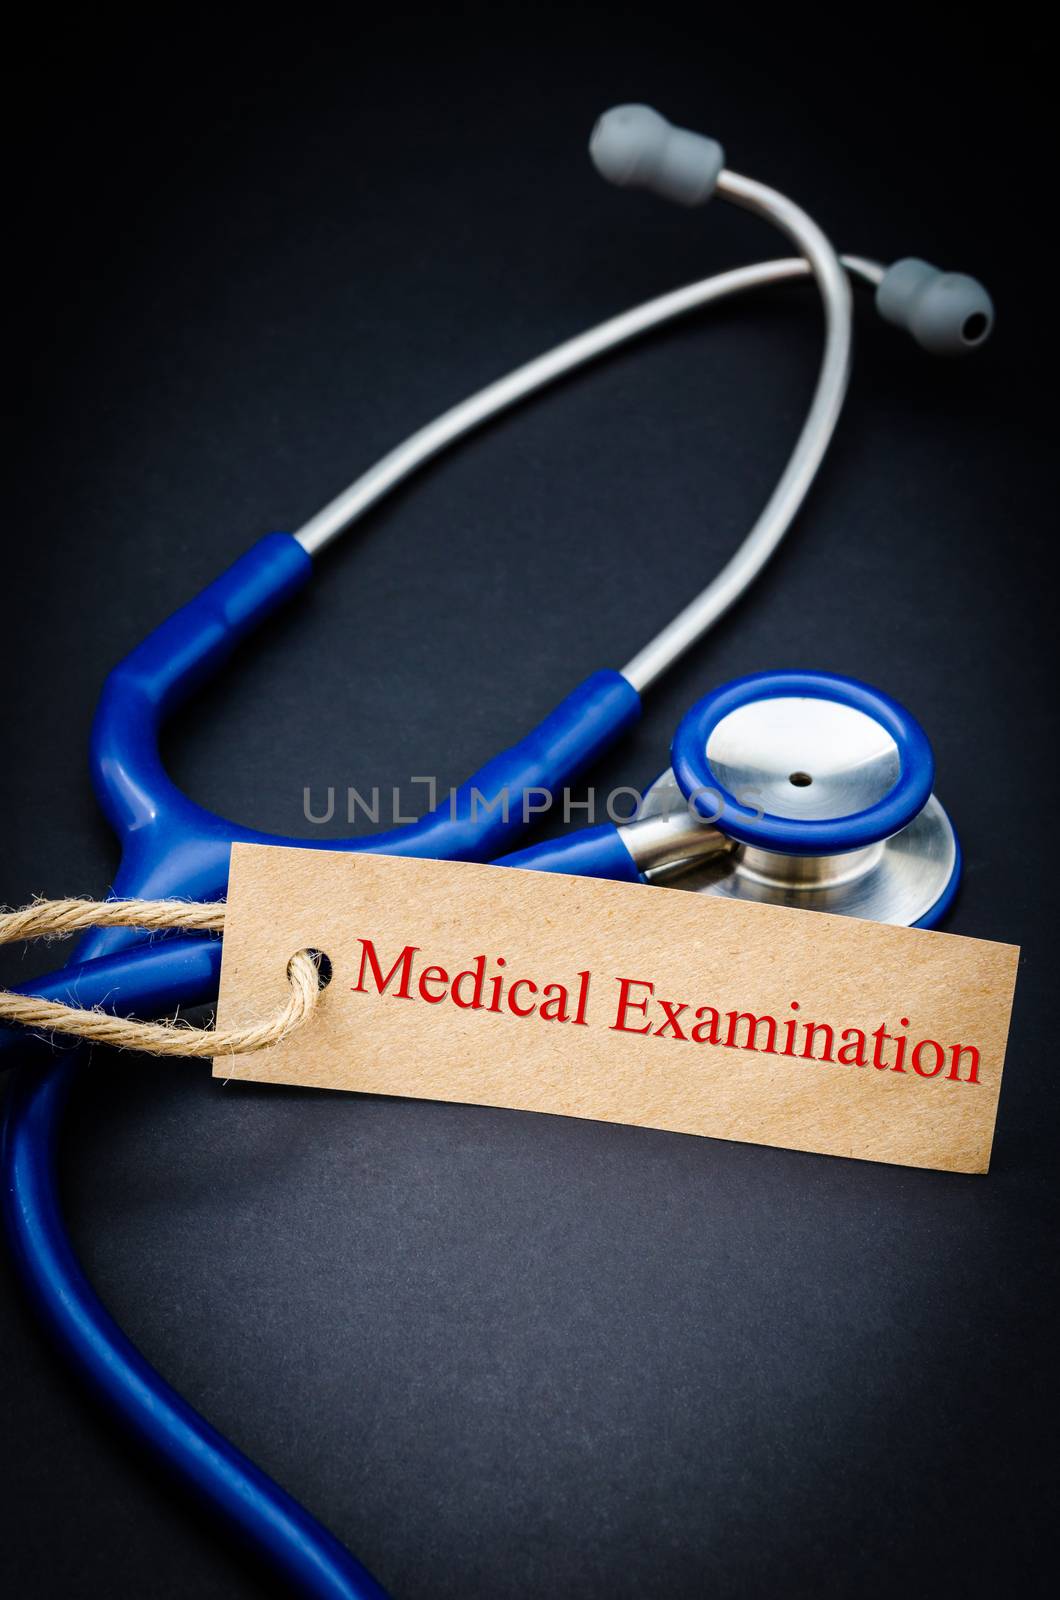 Medical examination in paper tag with stethoscope on black background - health concept. Medical conceptual